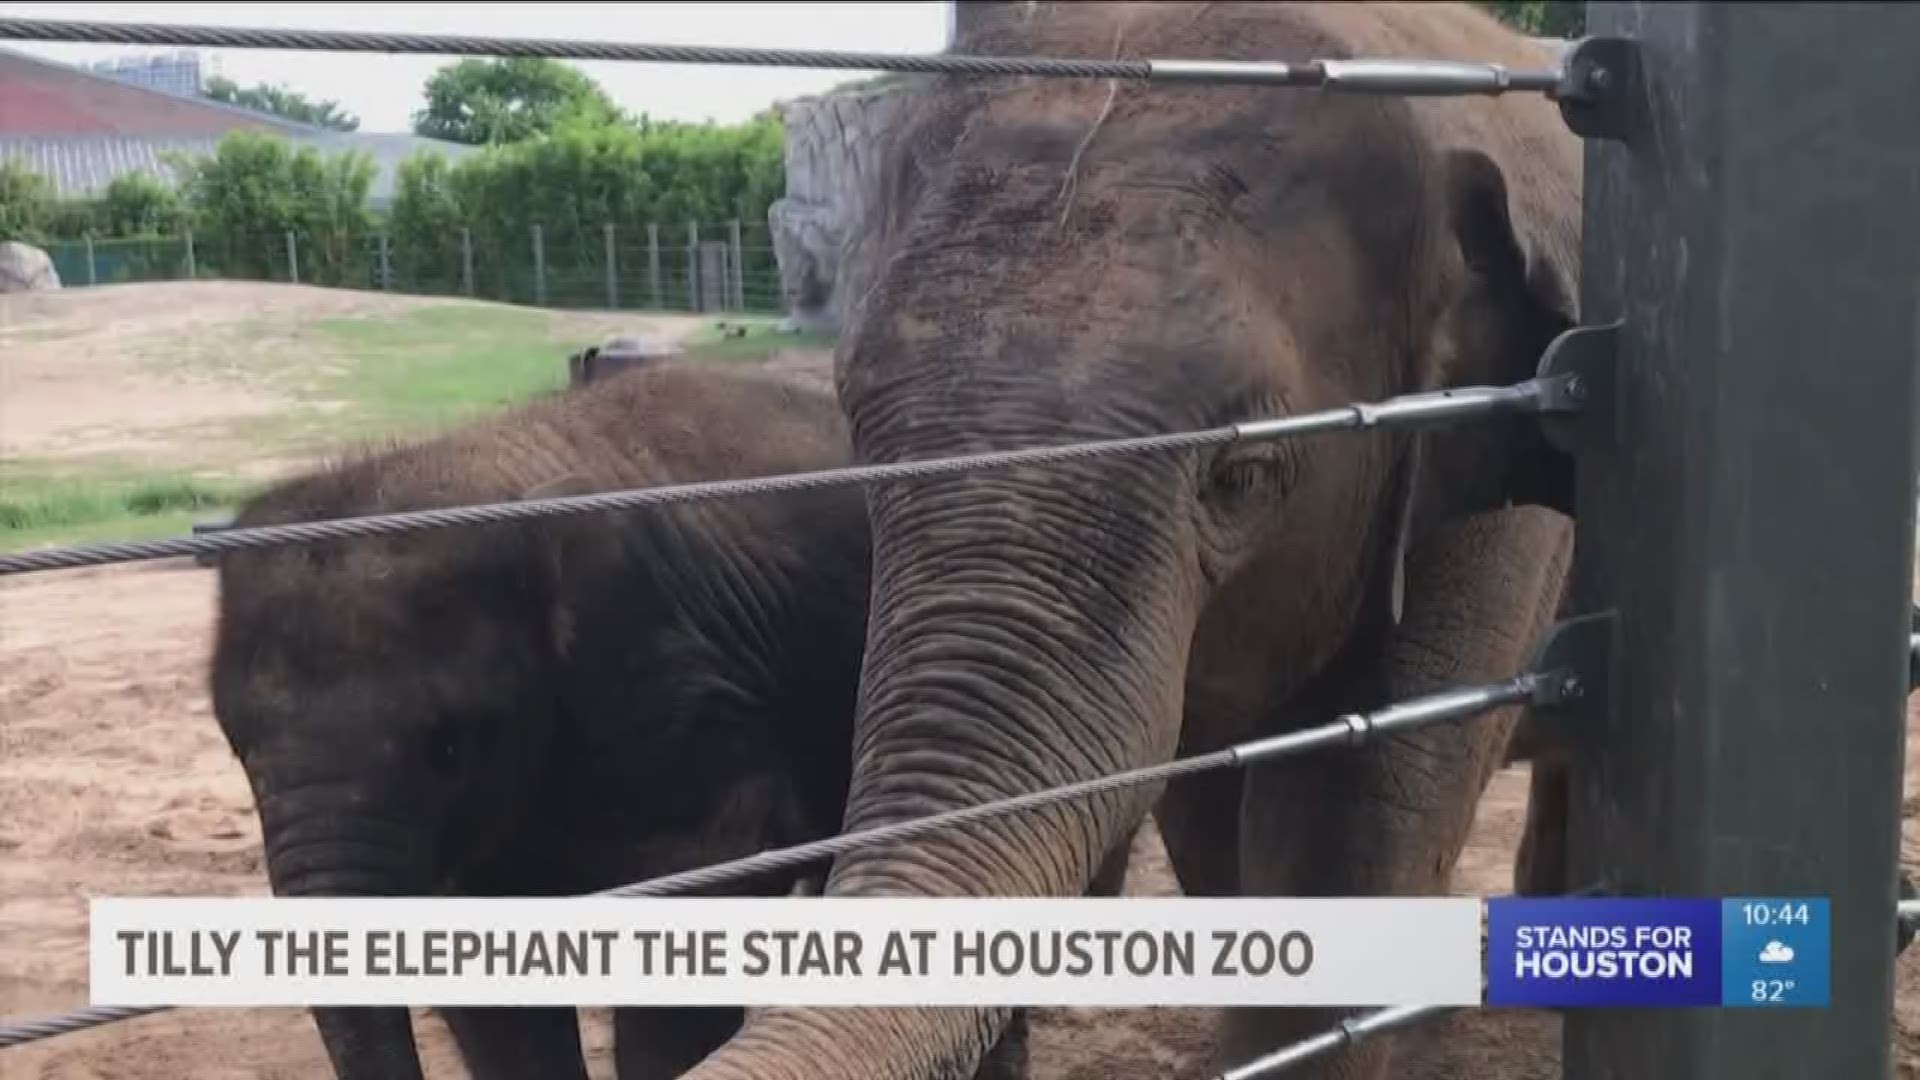 One of the newest additions to the Houston Zoo is stealing hearts and stealing the show. Families can't get enough of Tilly, the baby elephant.